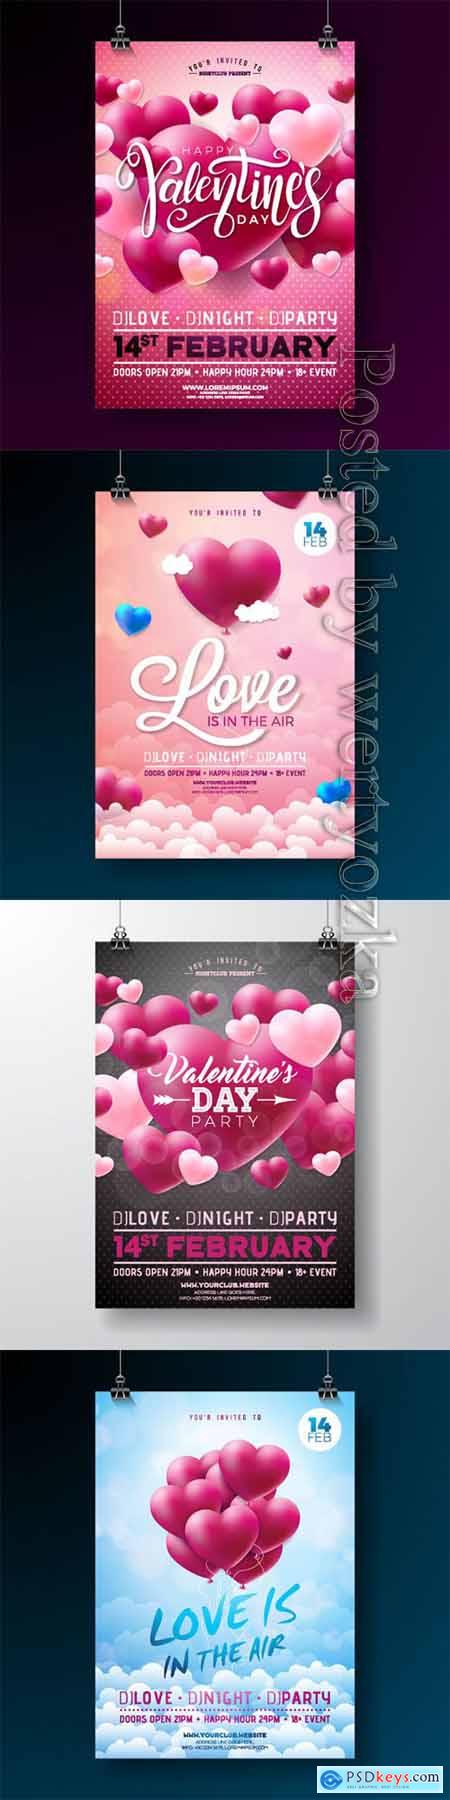 Vector Valentines day party flyer design with love